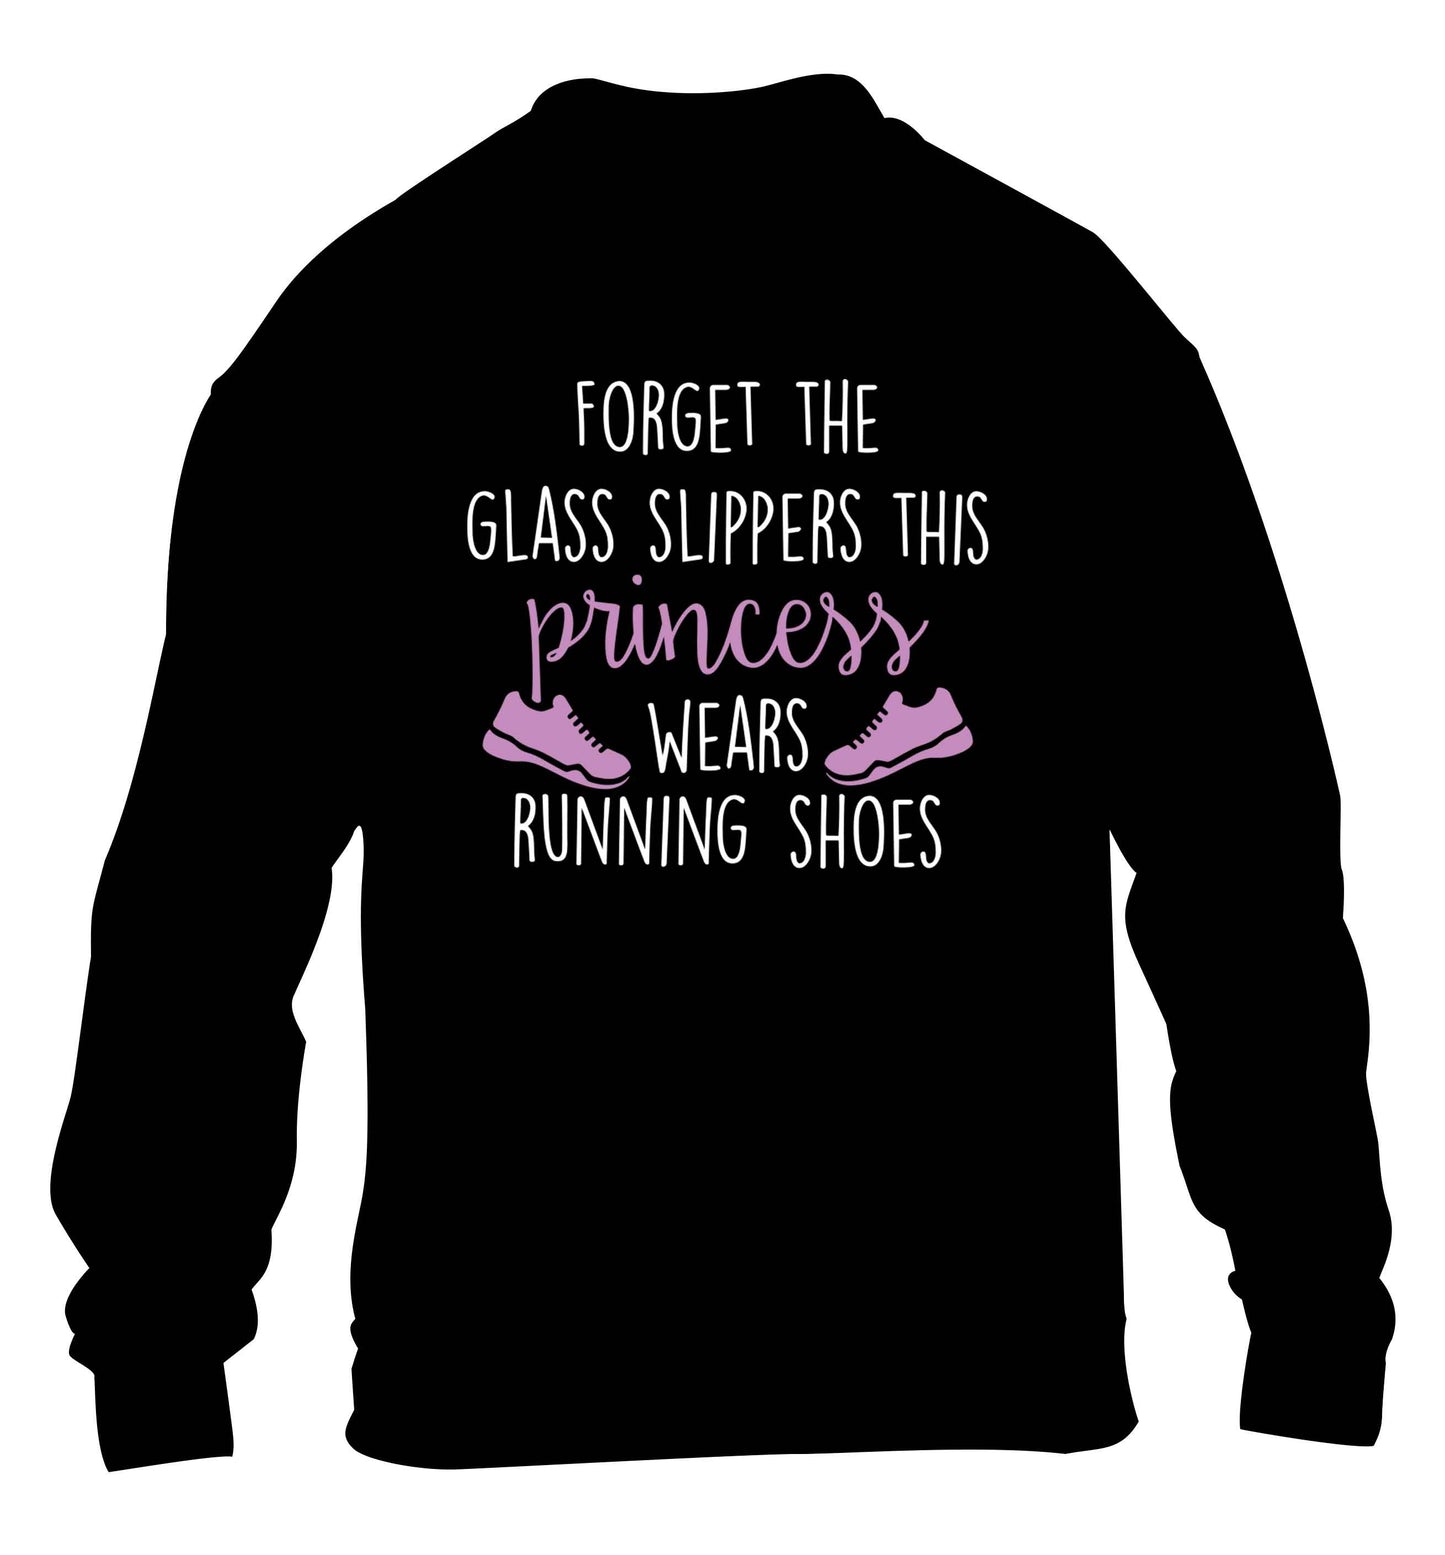 Forget the glass slippers this princess wears running shoes children's black sweater 12-13 Years